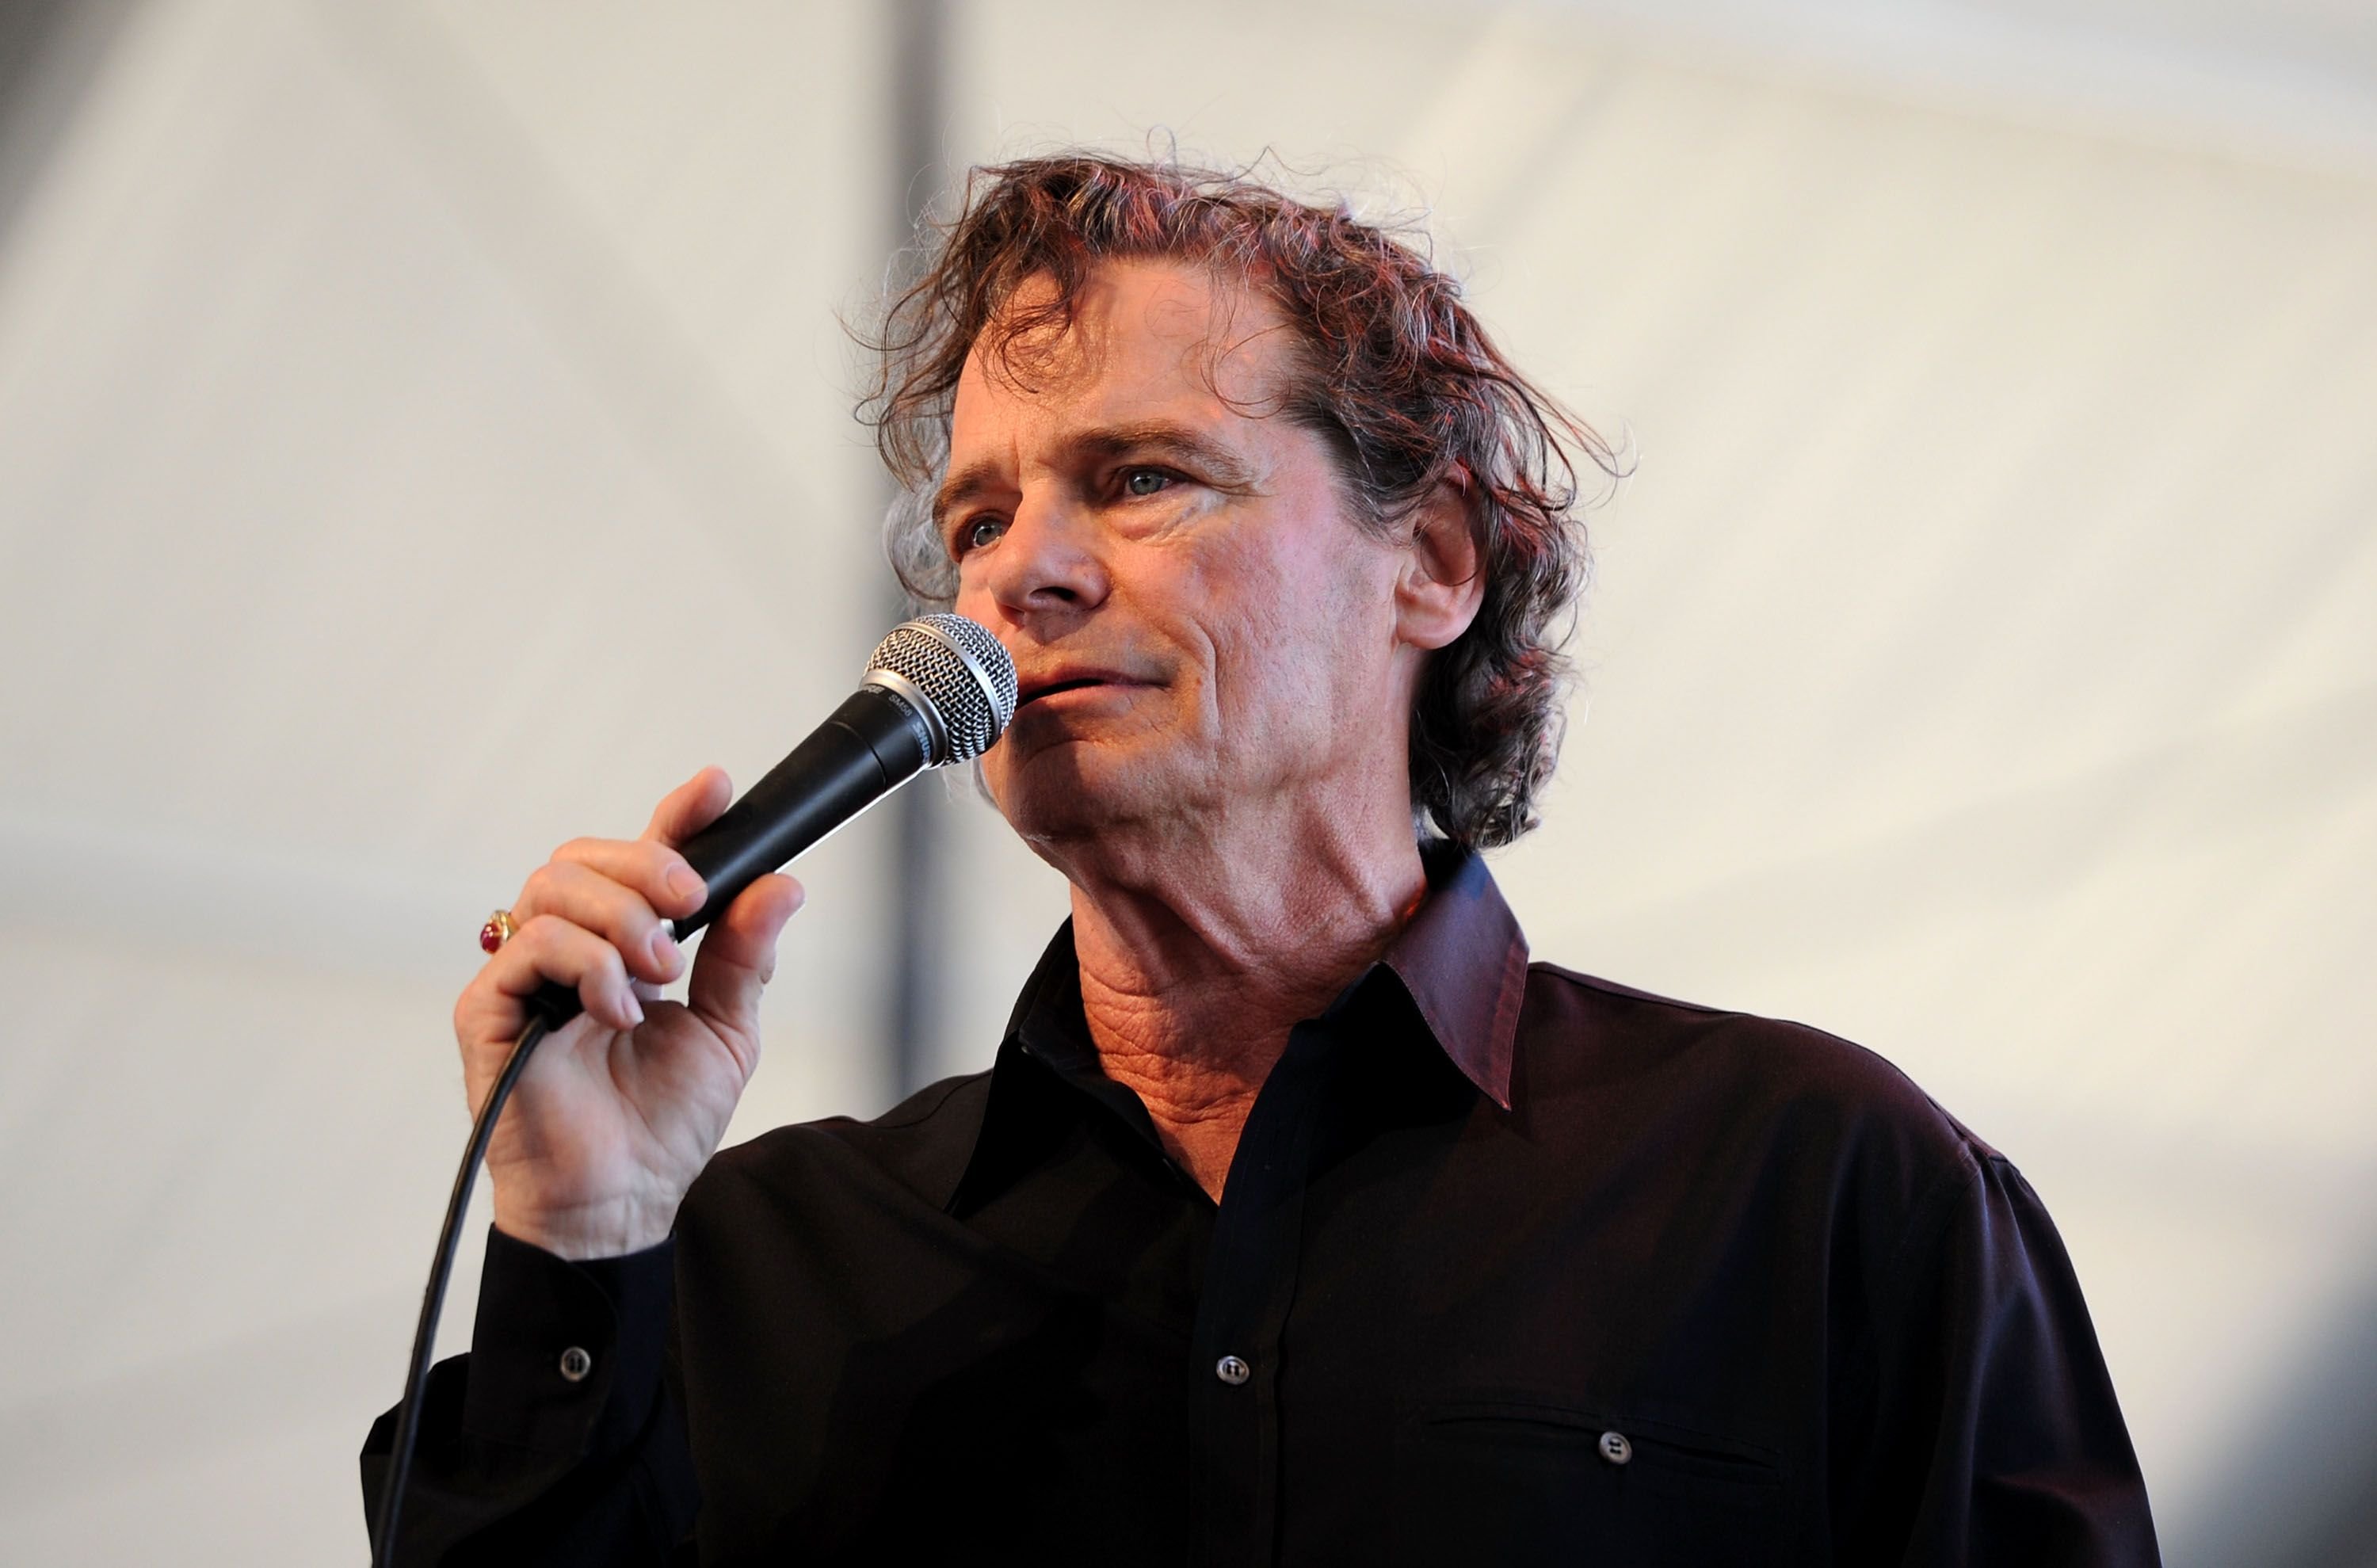 Singer B.J. Thomas performing at the 2010 Stagecoach Music Festival at the Empire Polo Club in Indio, California | Photo: Frazer Harrison/Getty Images 